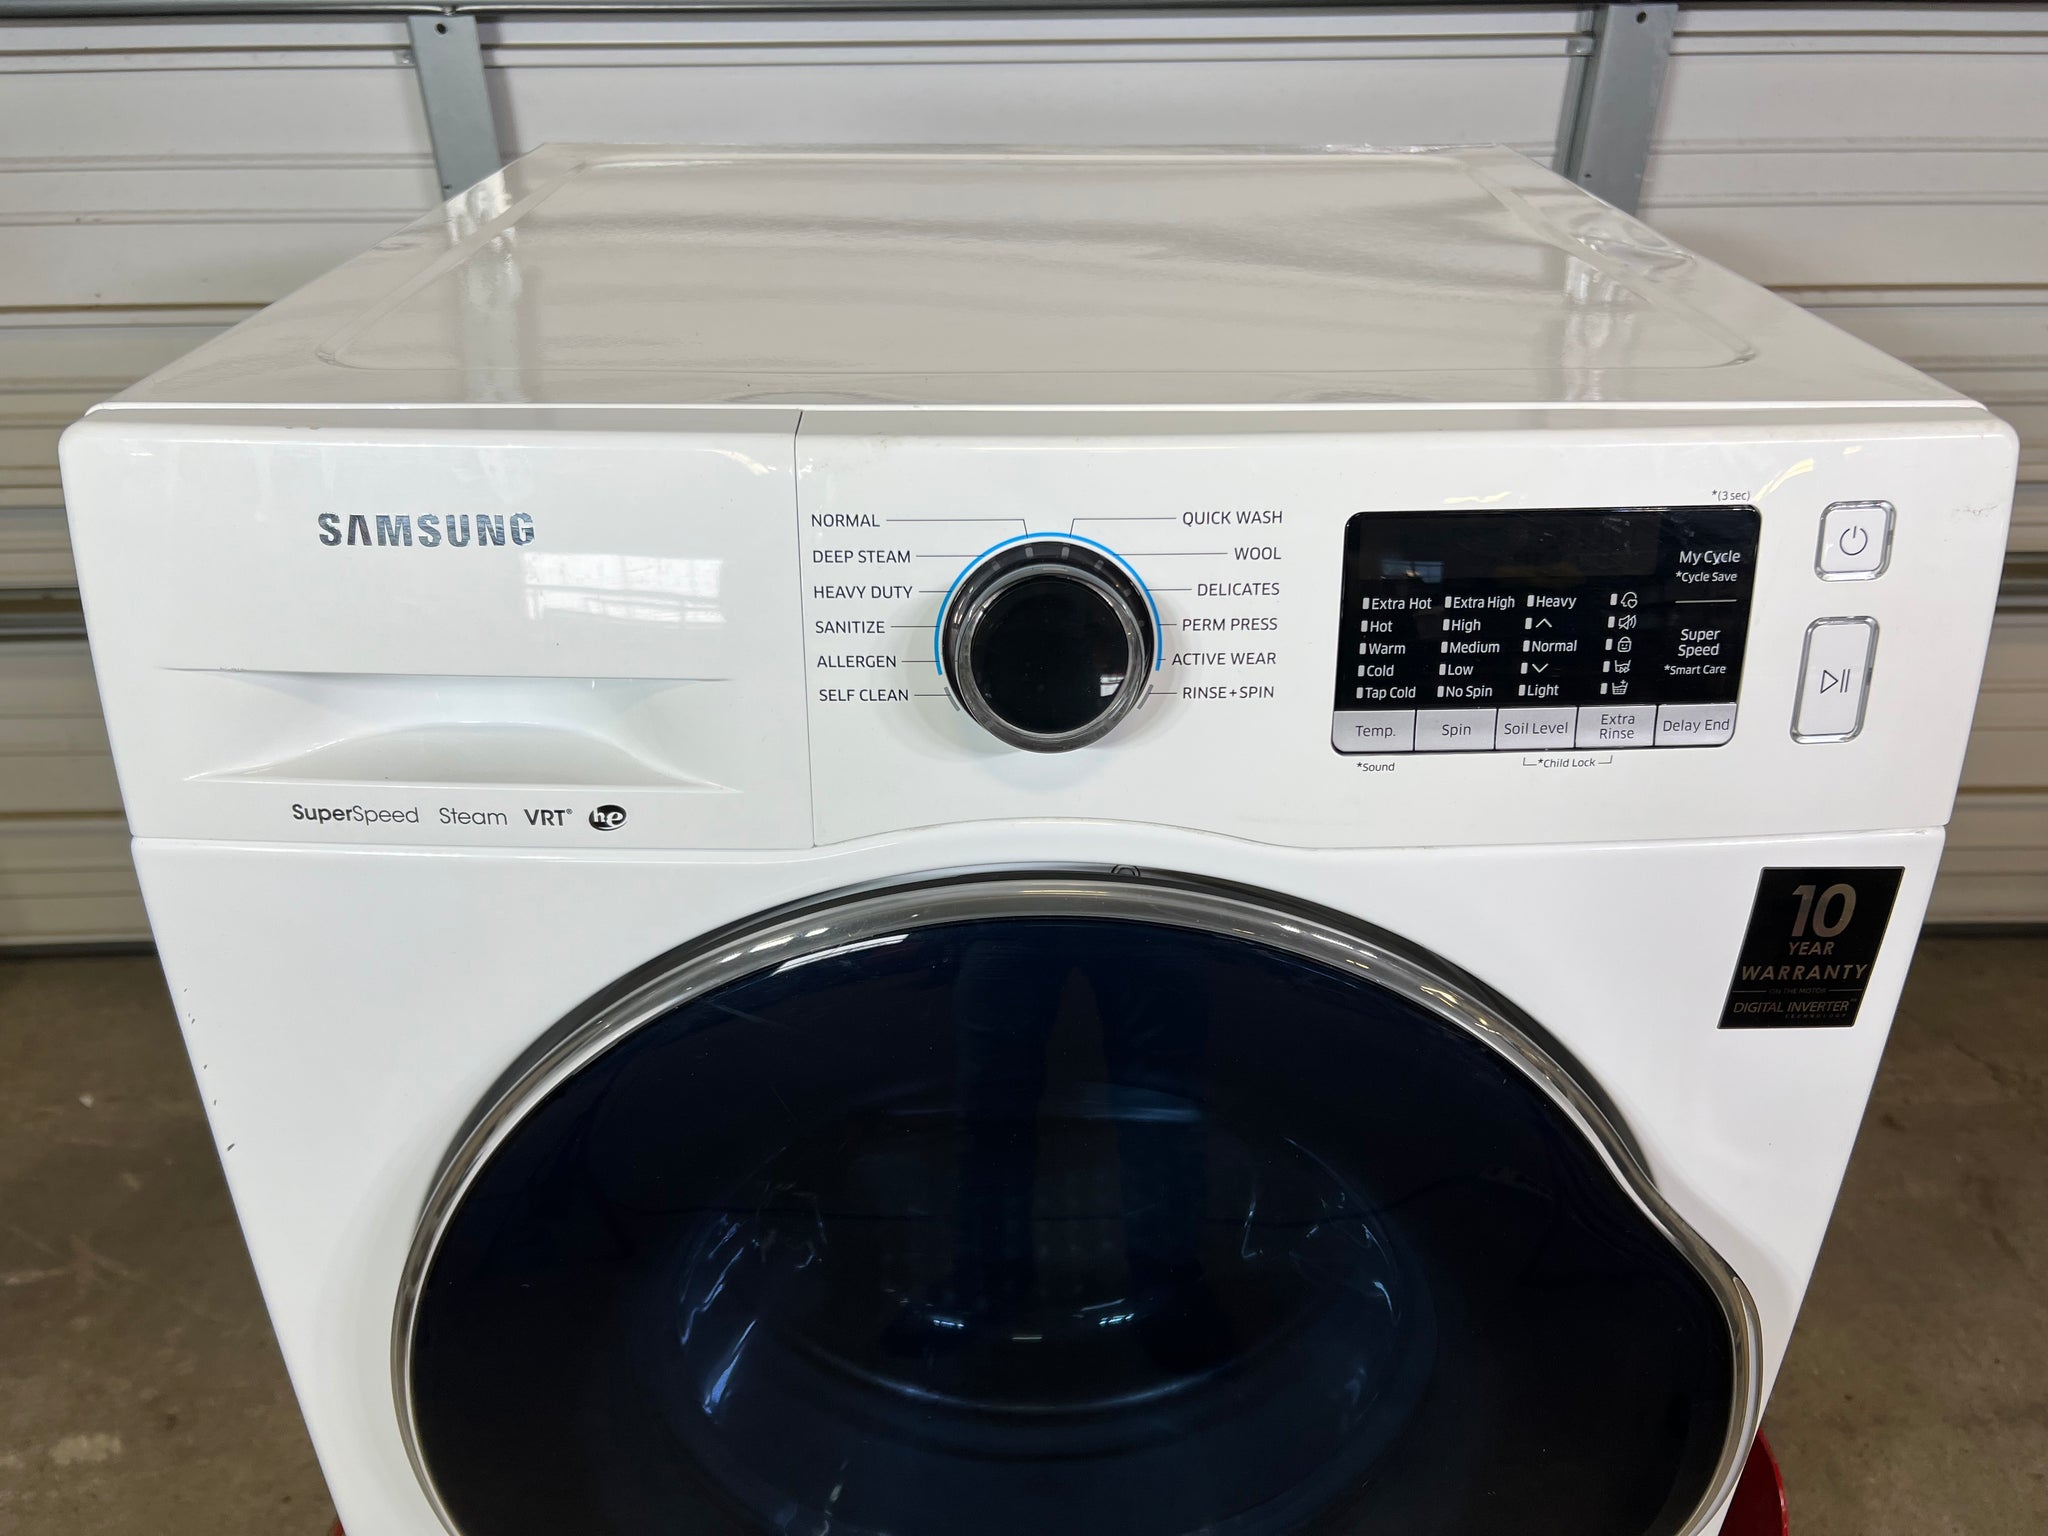 2.2 cu. ft. Front Load Washer with Super Speed in White Washer -  WW22K6800AW/A2